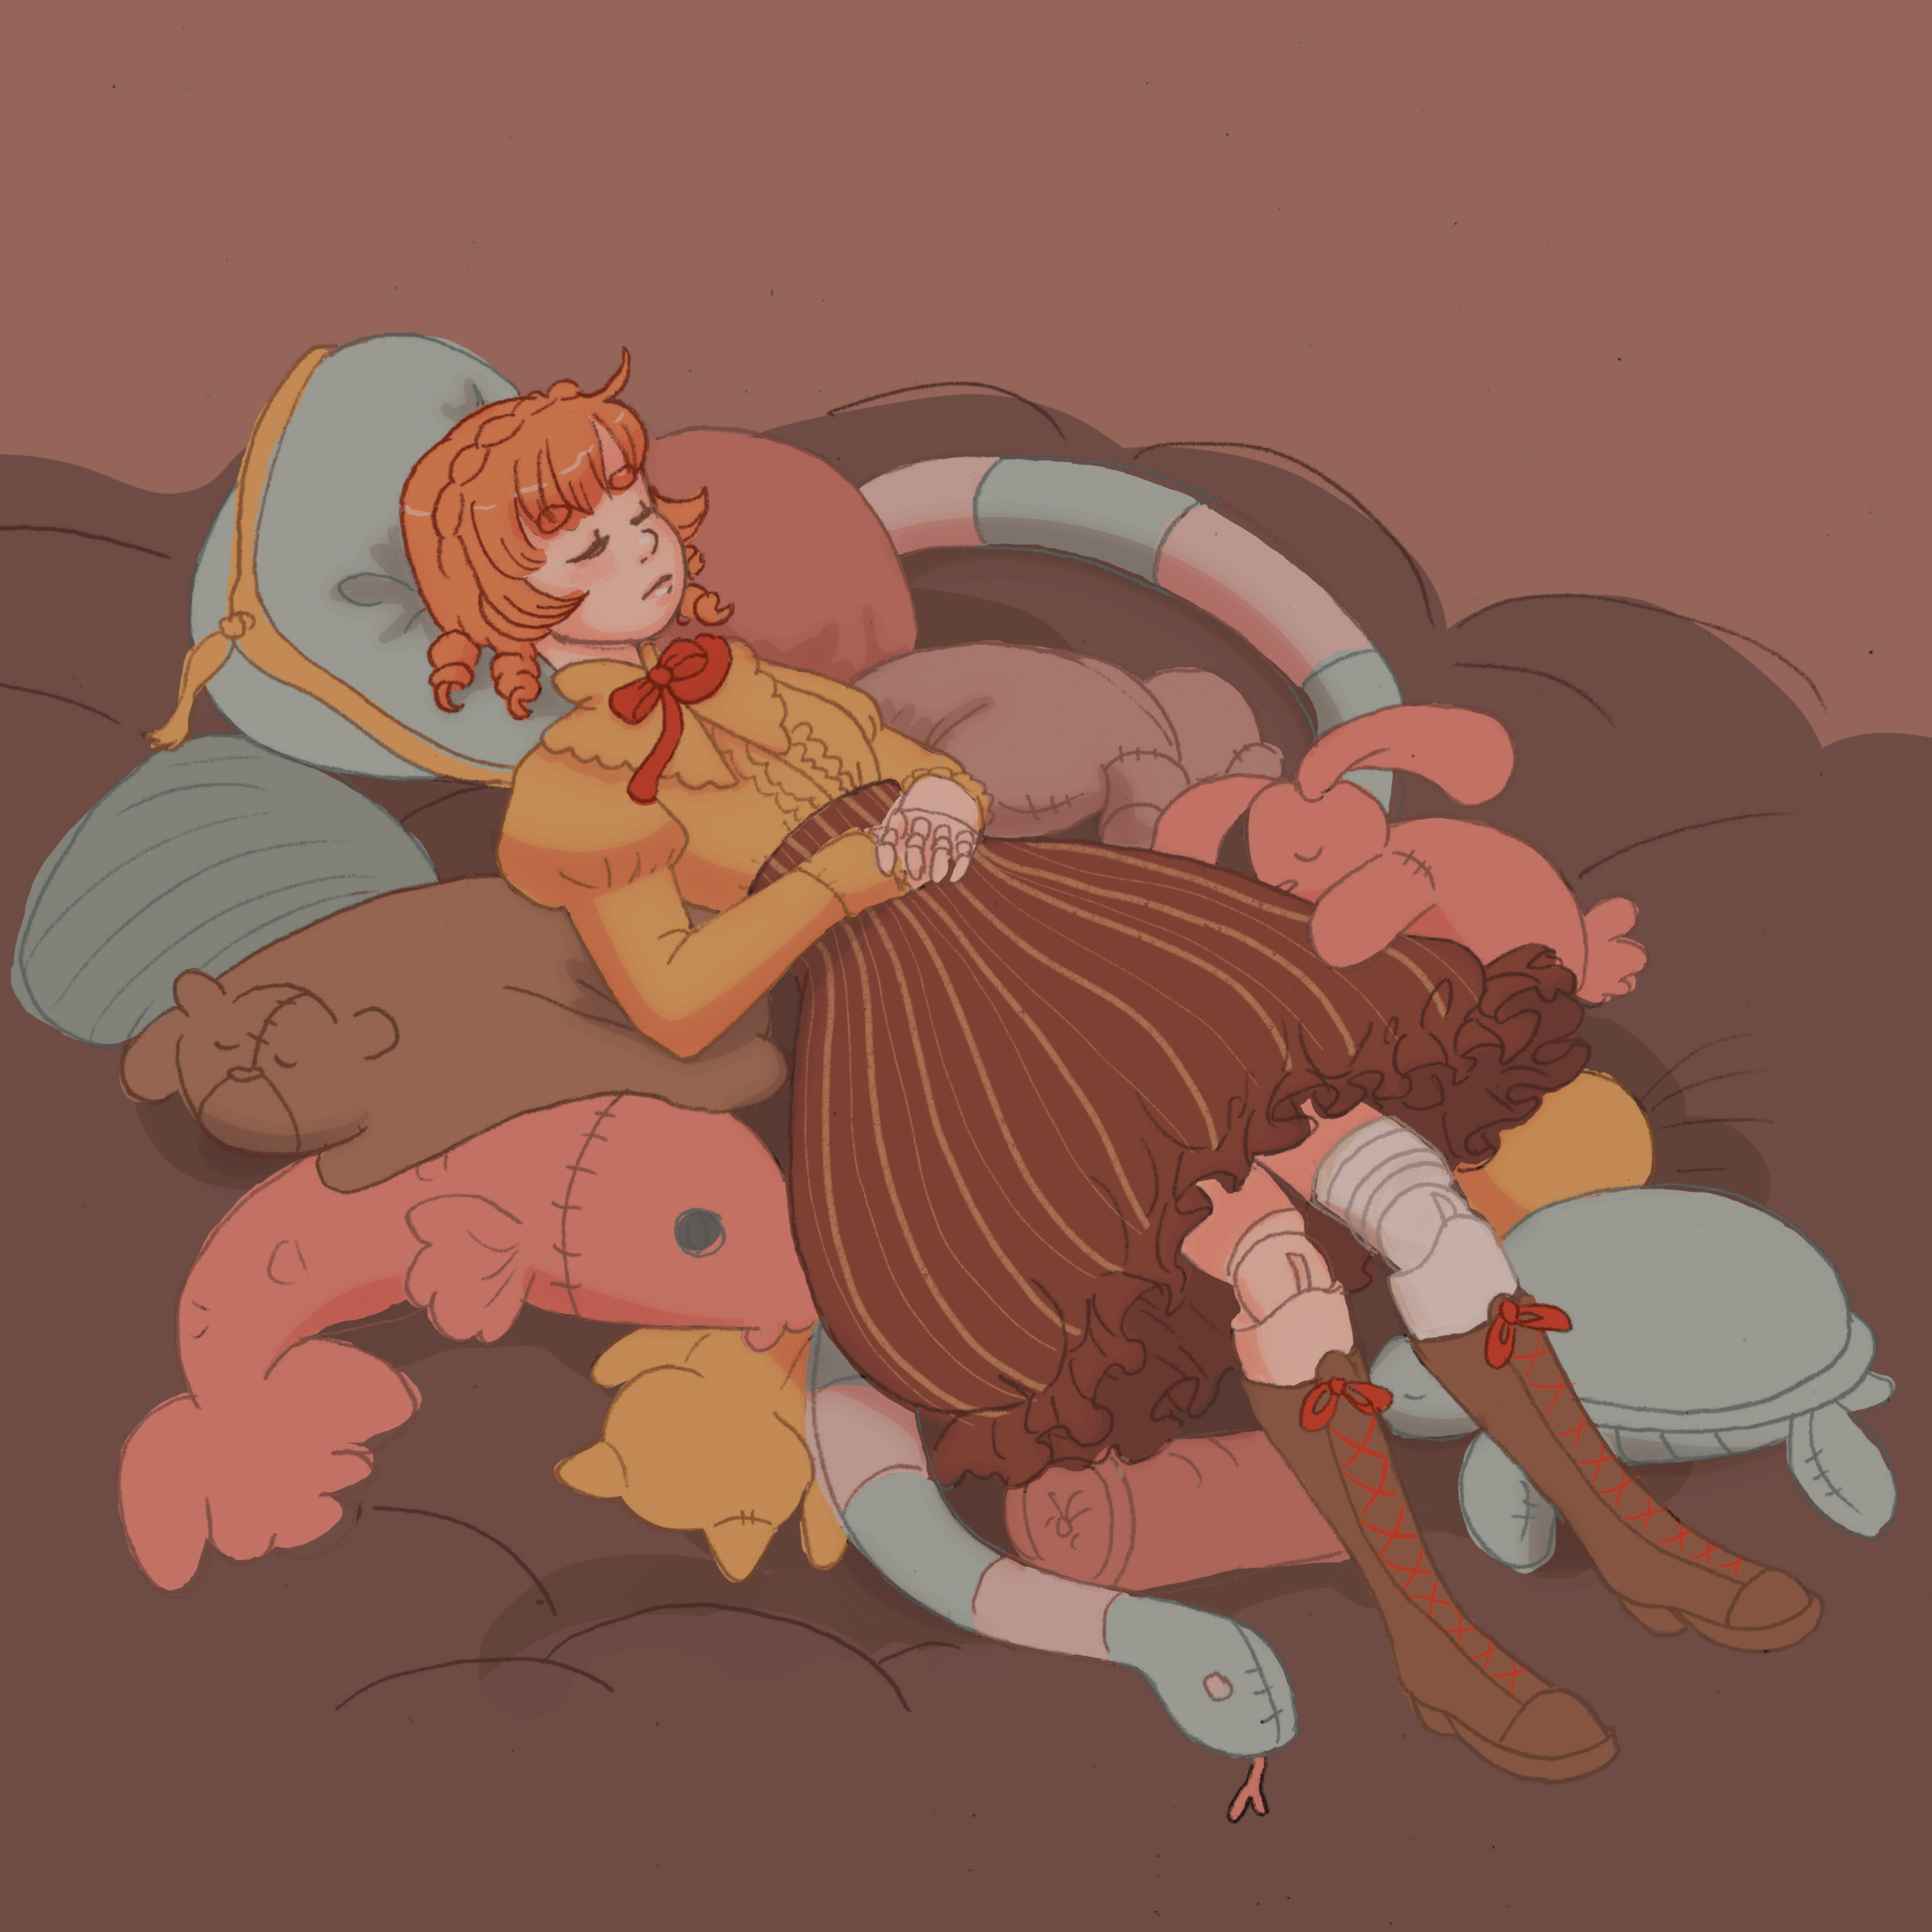 Illustration artwork of a character sleeping on a bed of soft toys